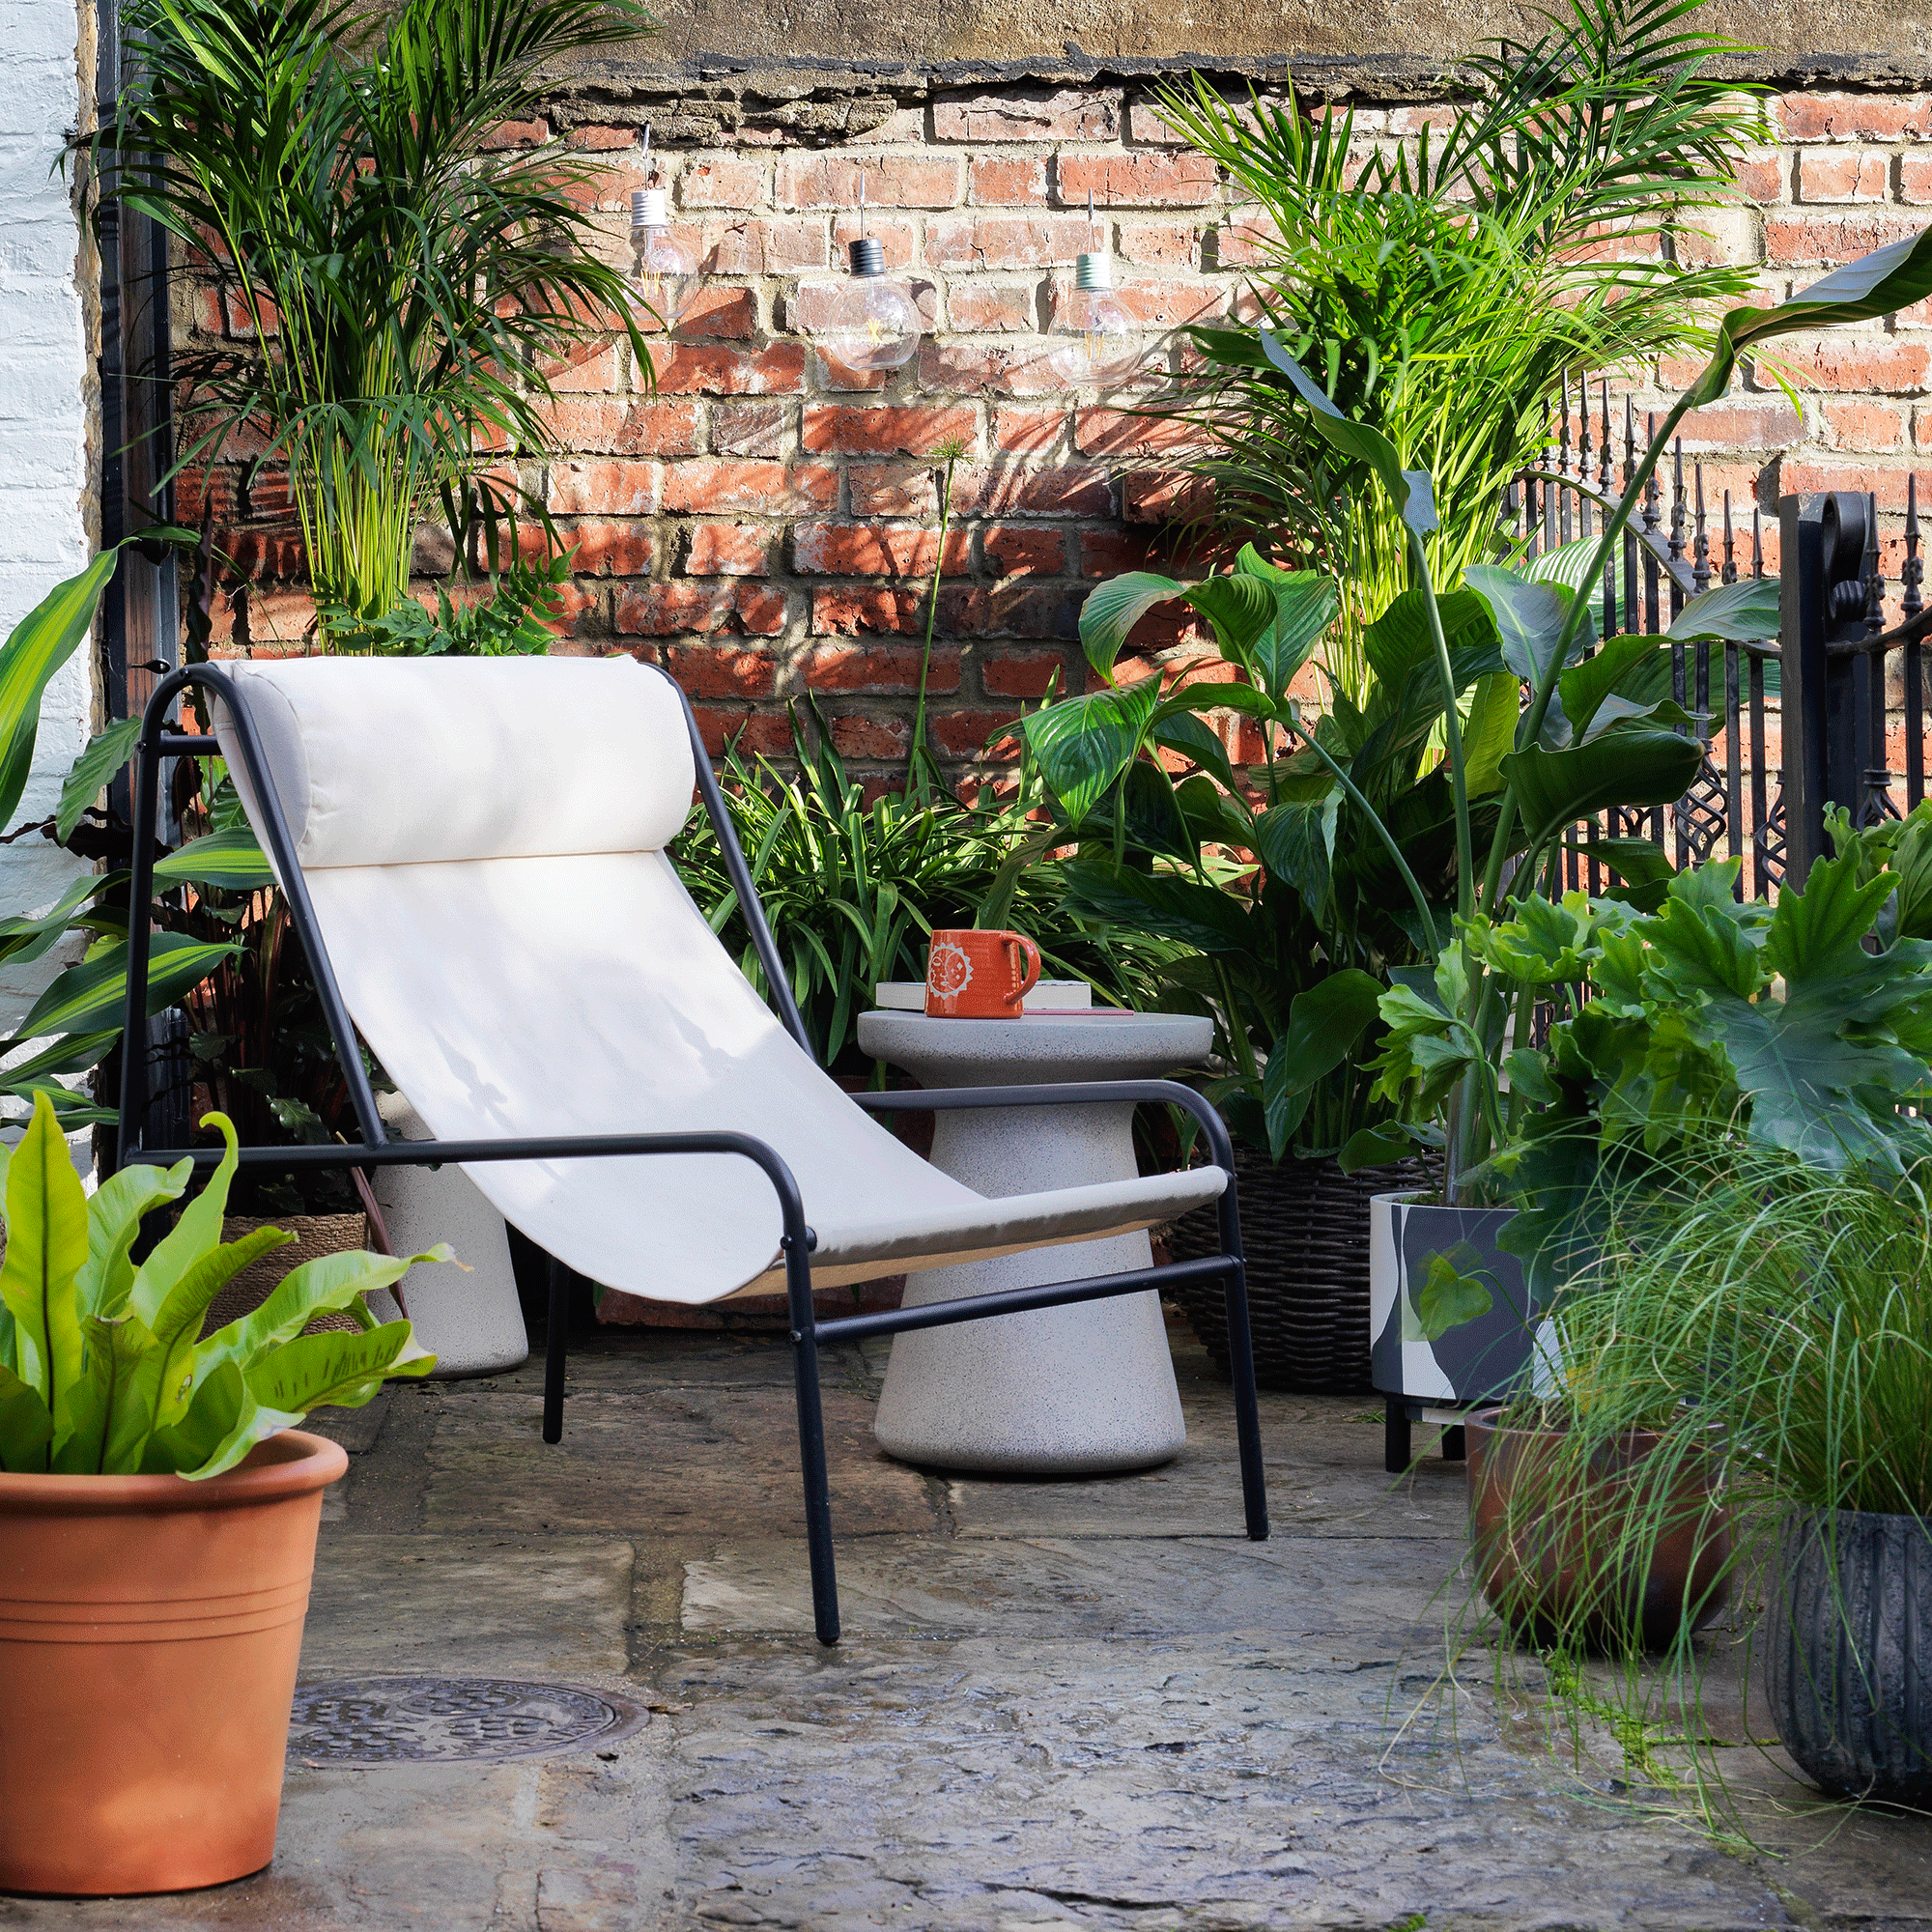 Lounge chair in white and black surrounded by house plants